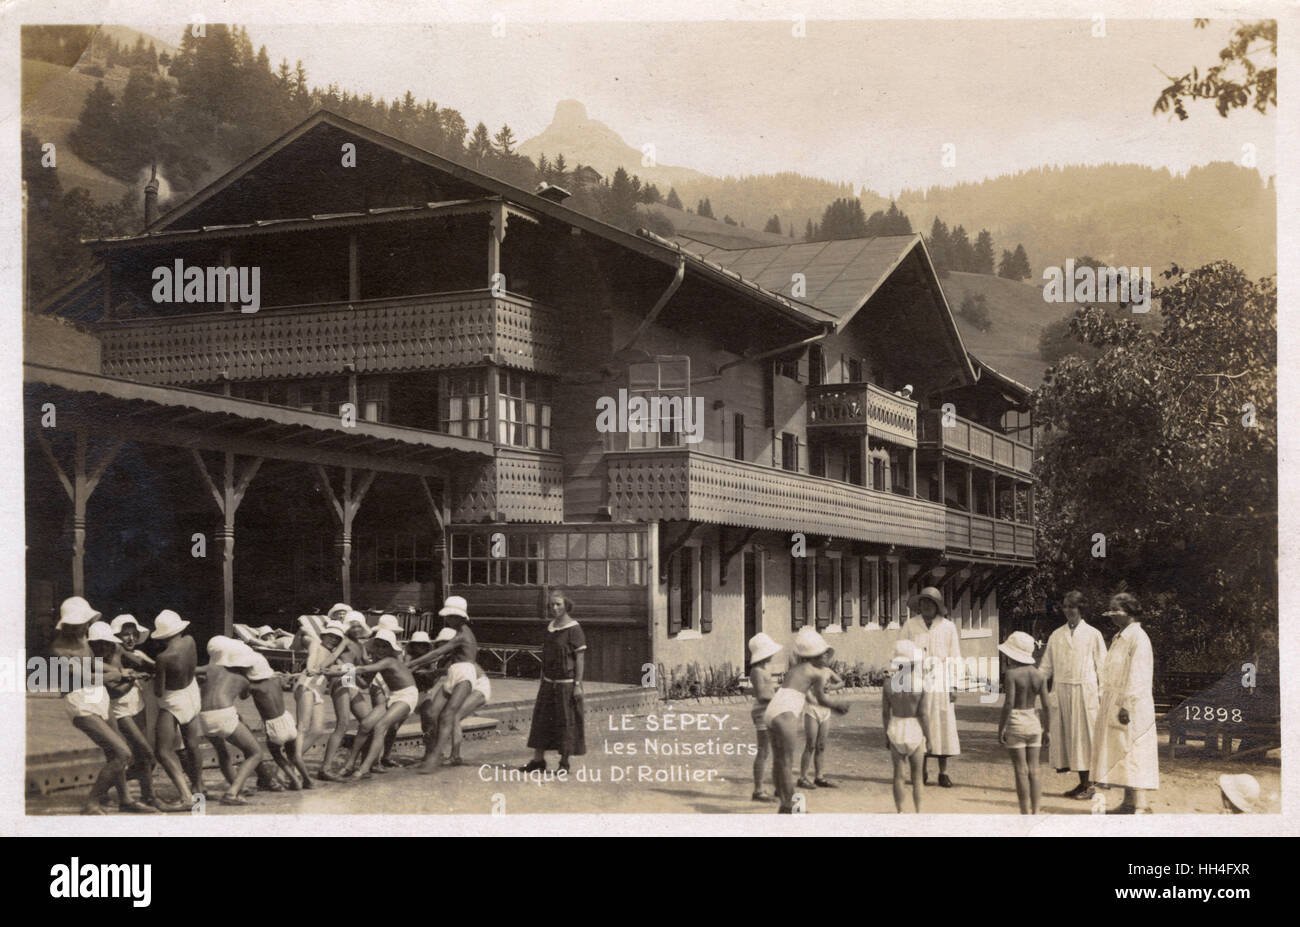 Switzerland -'The Hazels' - A High Altitude Clinic of Dr. Auguste Rollier (The Sun Doctor) at Le Sepey, Cergnat - specialising in Sunlight Cure for children with TB and respiratory conditions (see: 10107353). Stock Photo